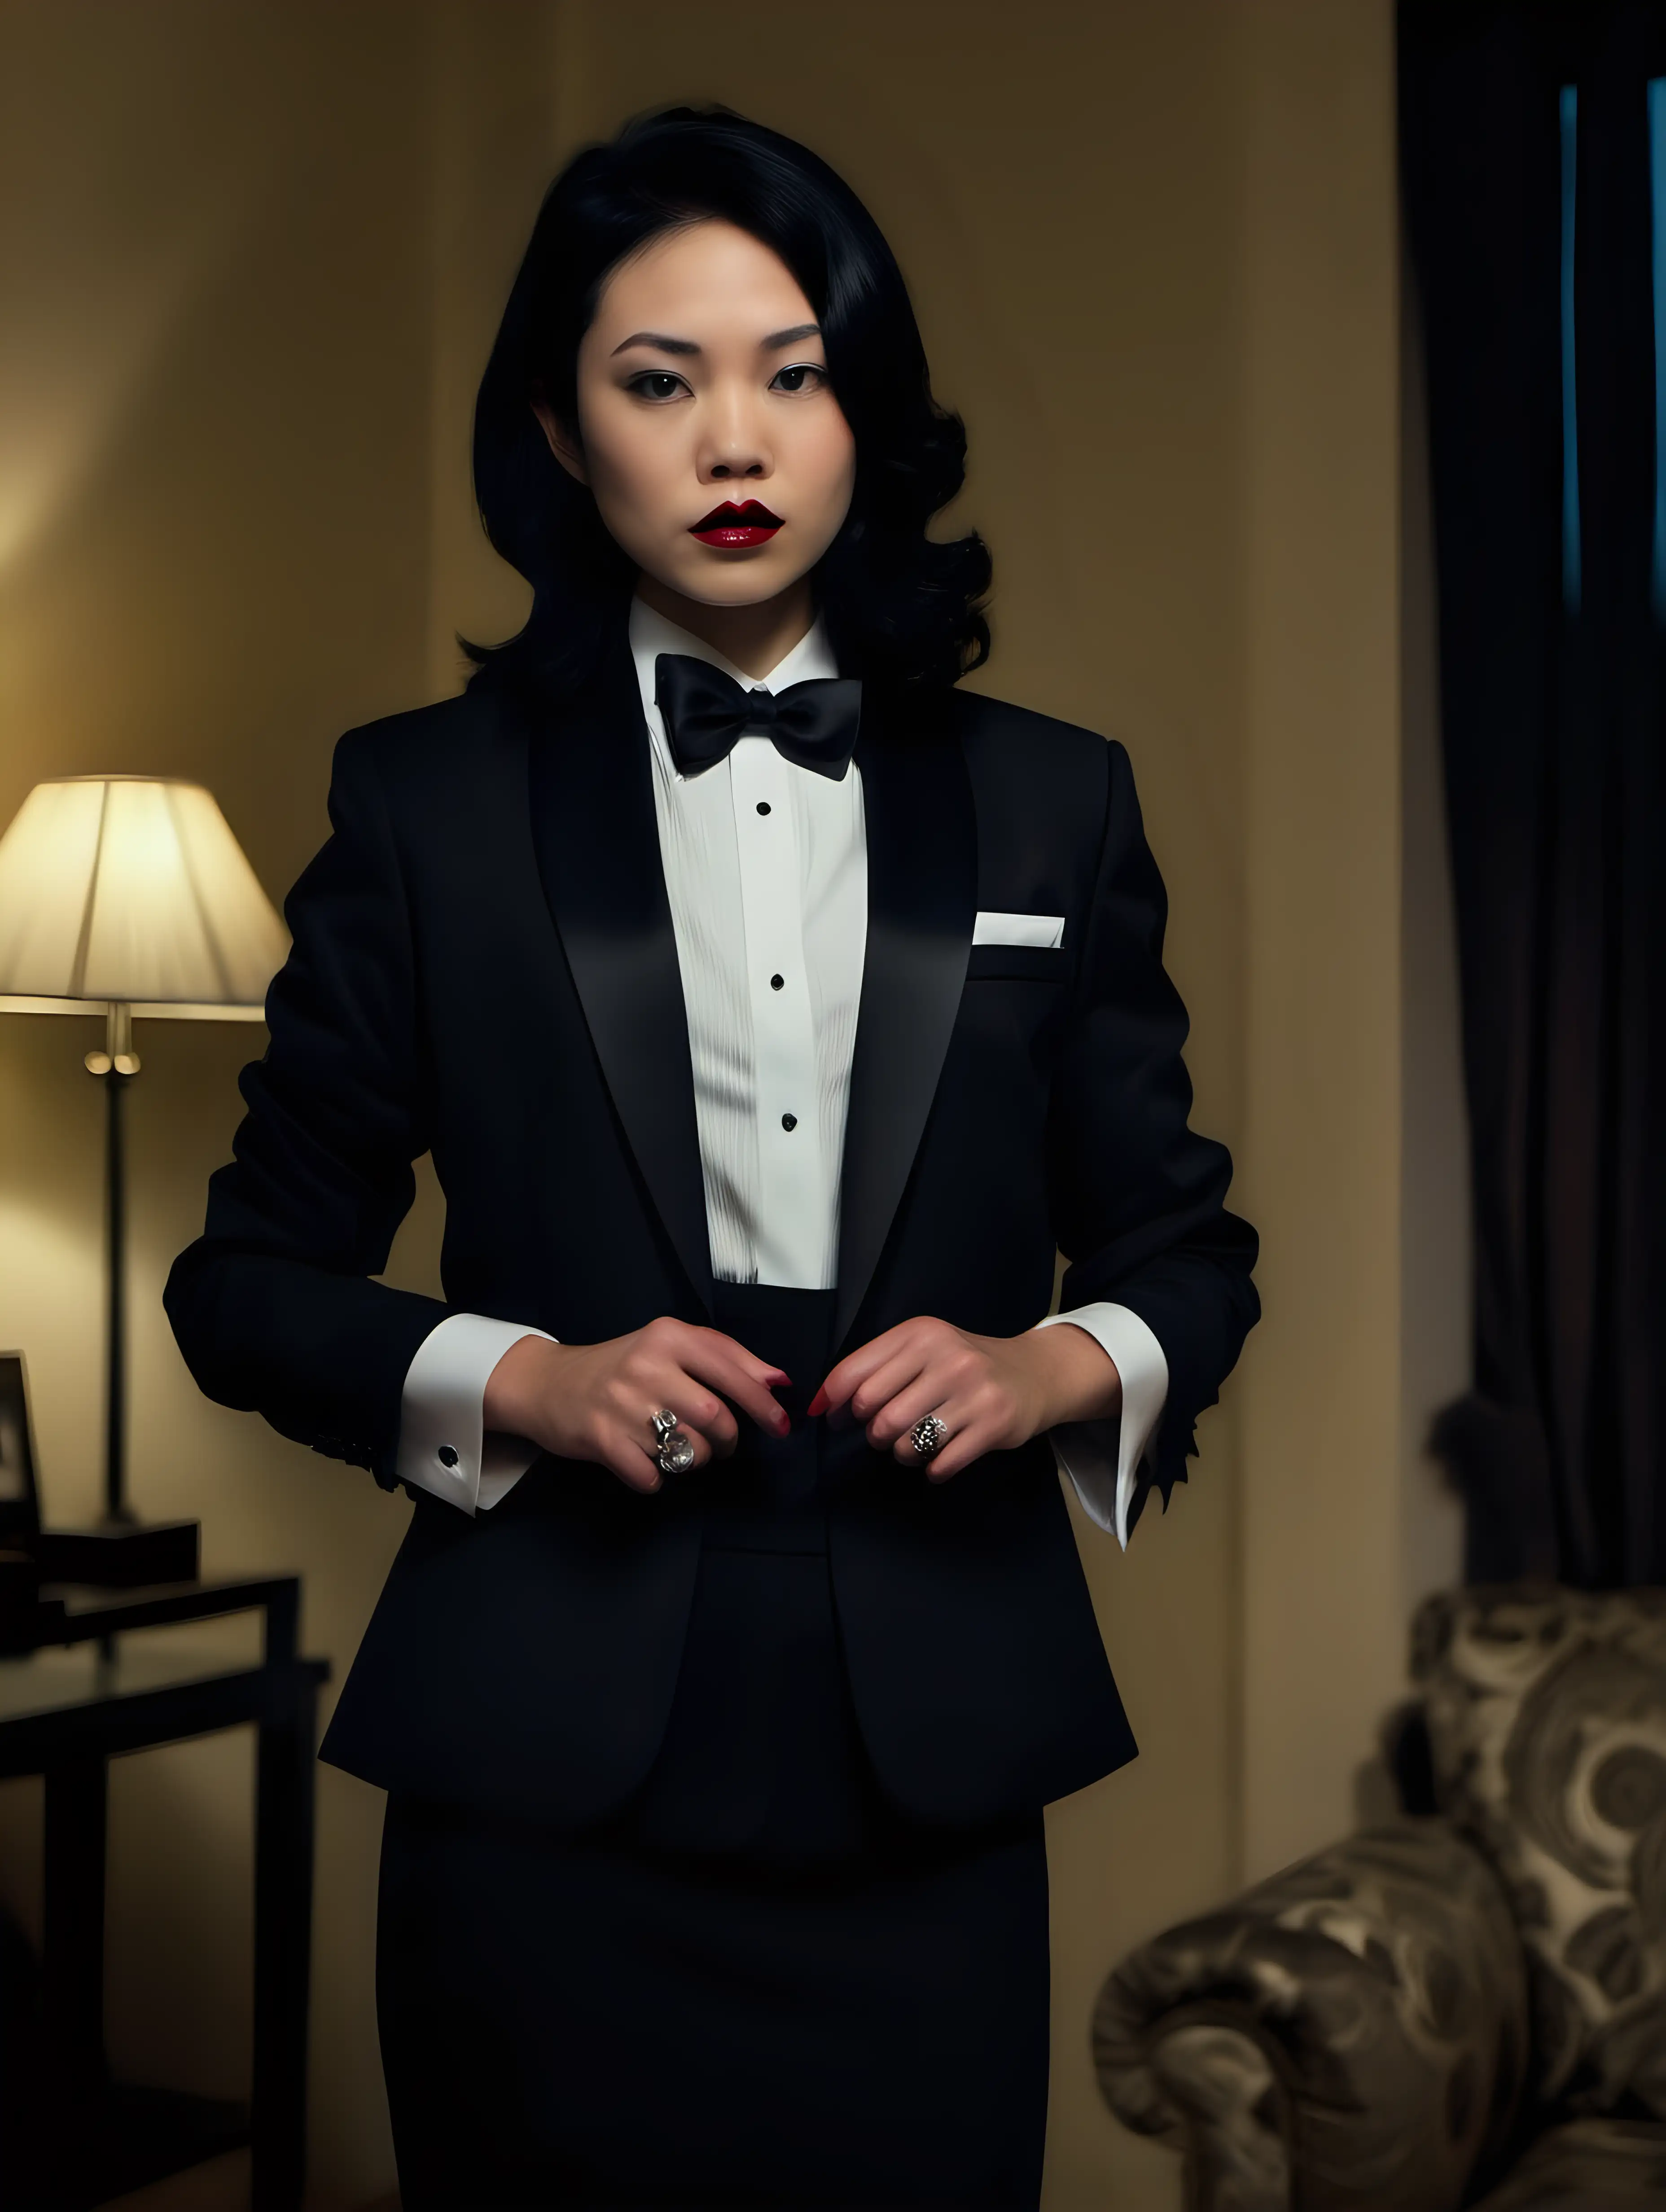 Stern Vietnamese woman with shoulder length black hair and lipstick wearing a tuxedo with a black bow tie is standing in a room at night.  (Her shirt has double french cuffs.)  She has cufflinks.  (Her jacket is open and has a corsage.)